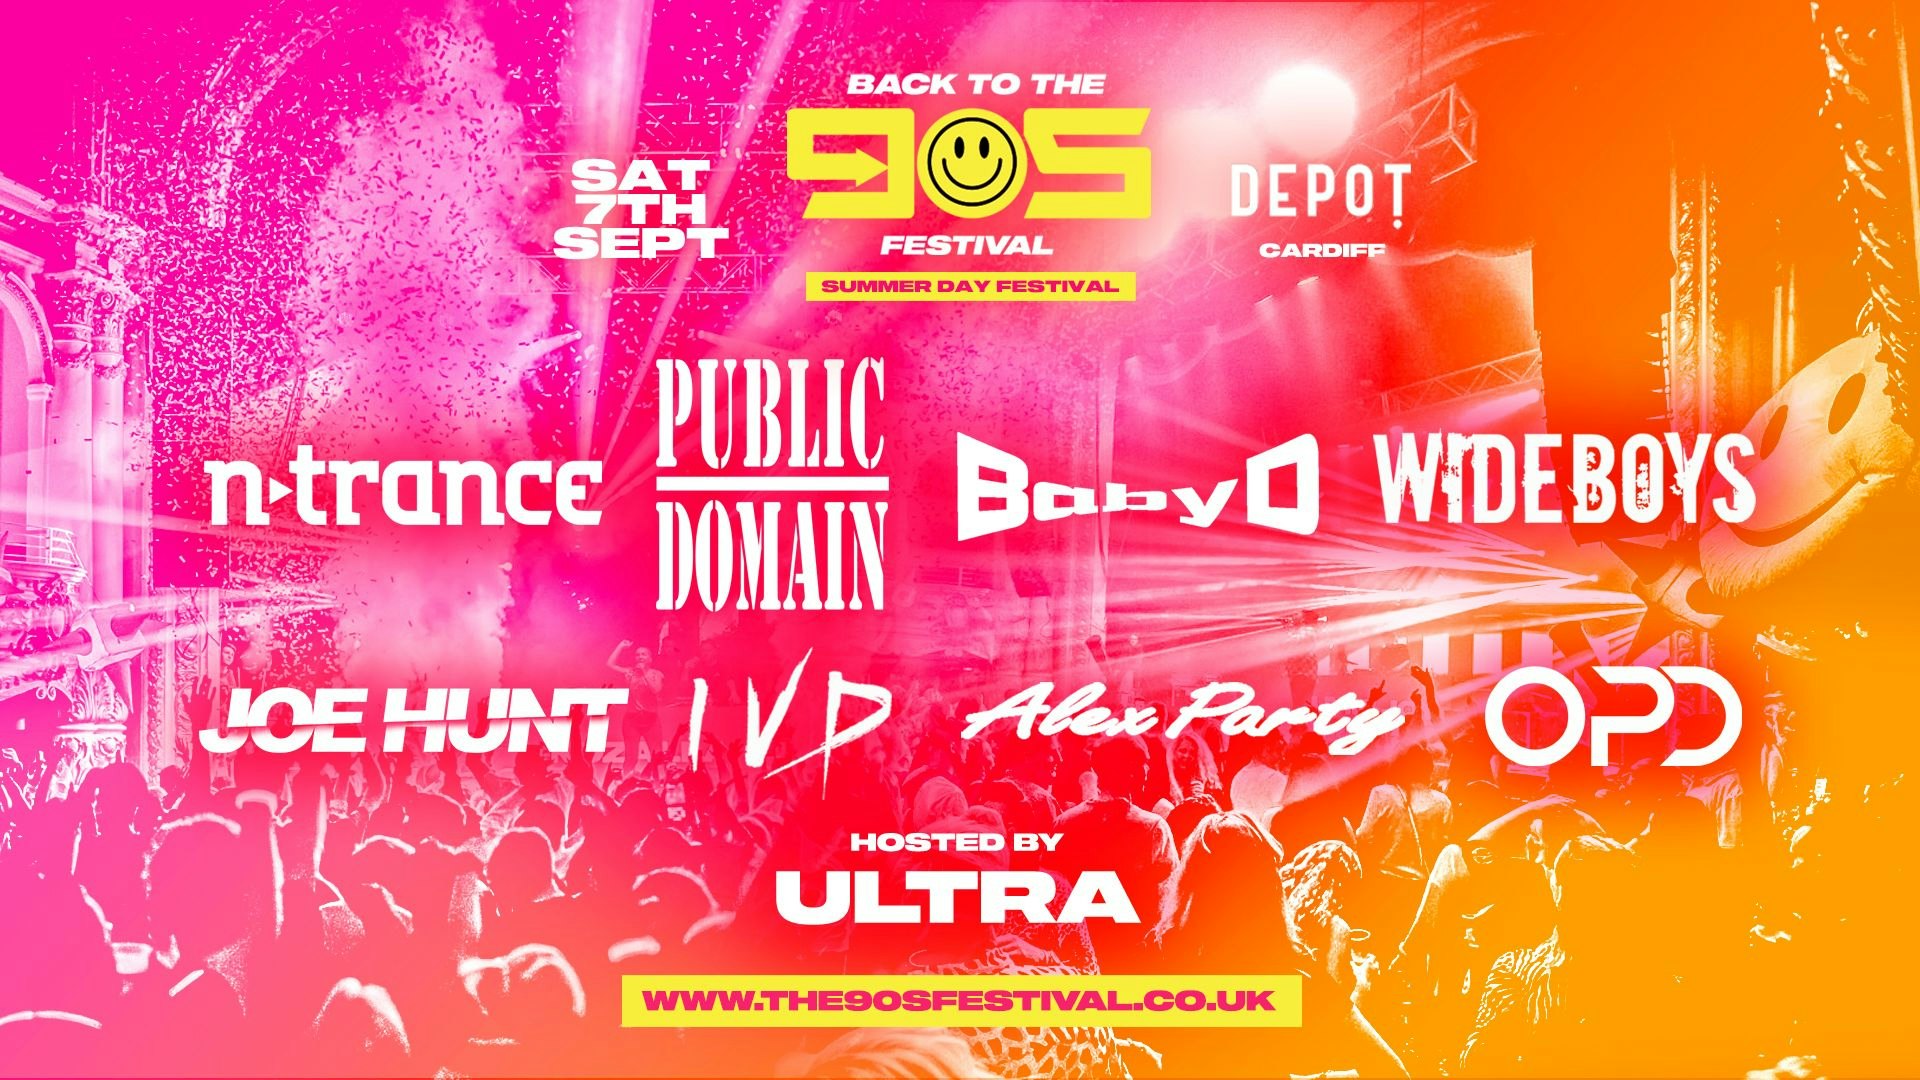 Back To The 90s – Summer Indoor Festival – Cardiff [TICKETS SELLING FAST!]